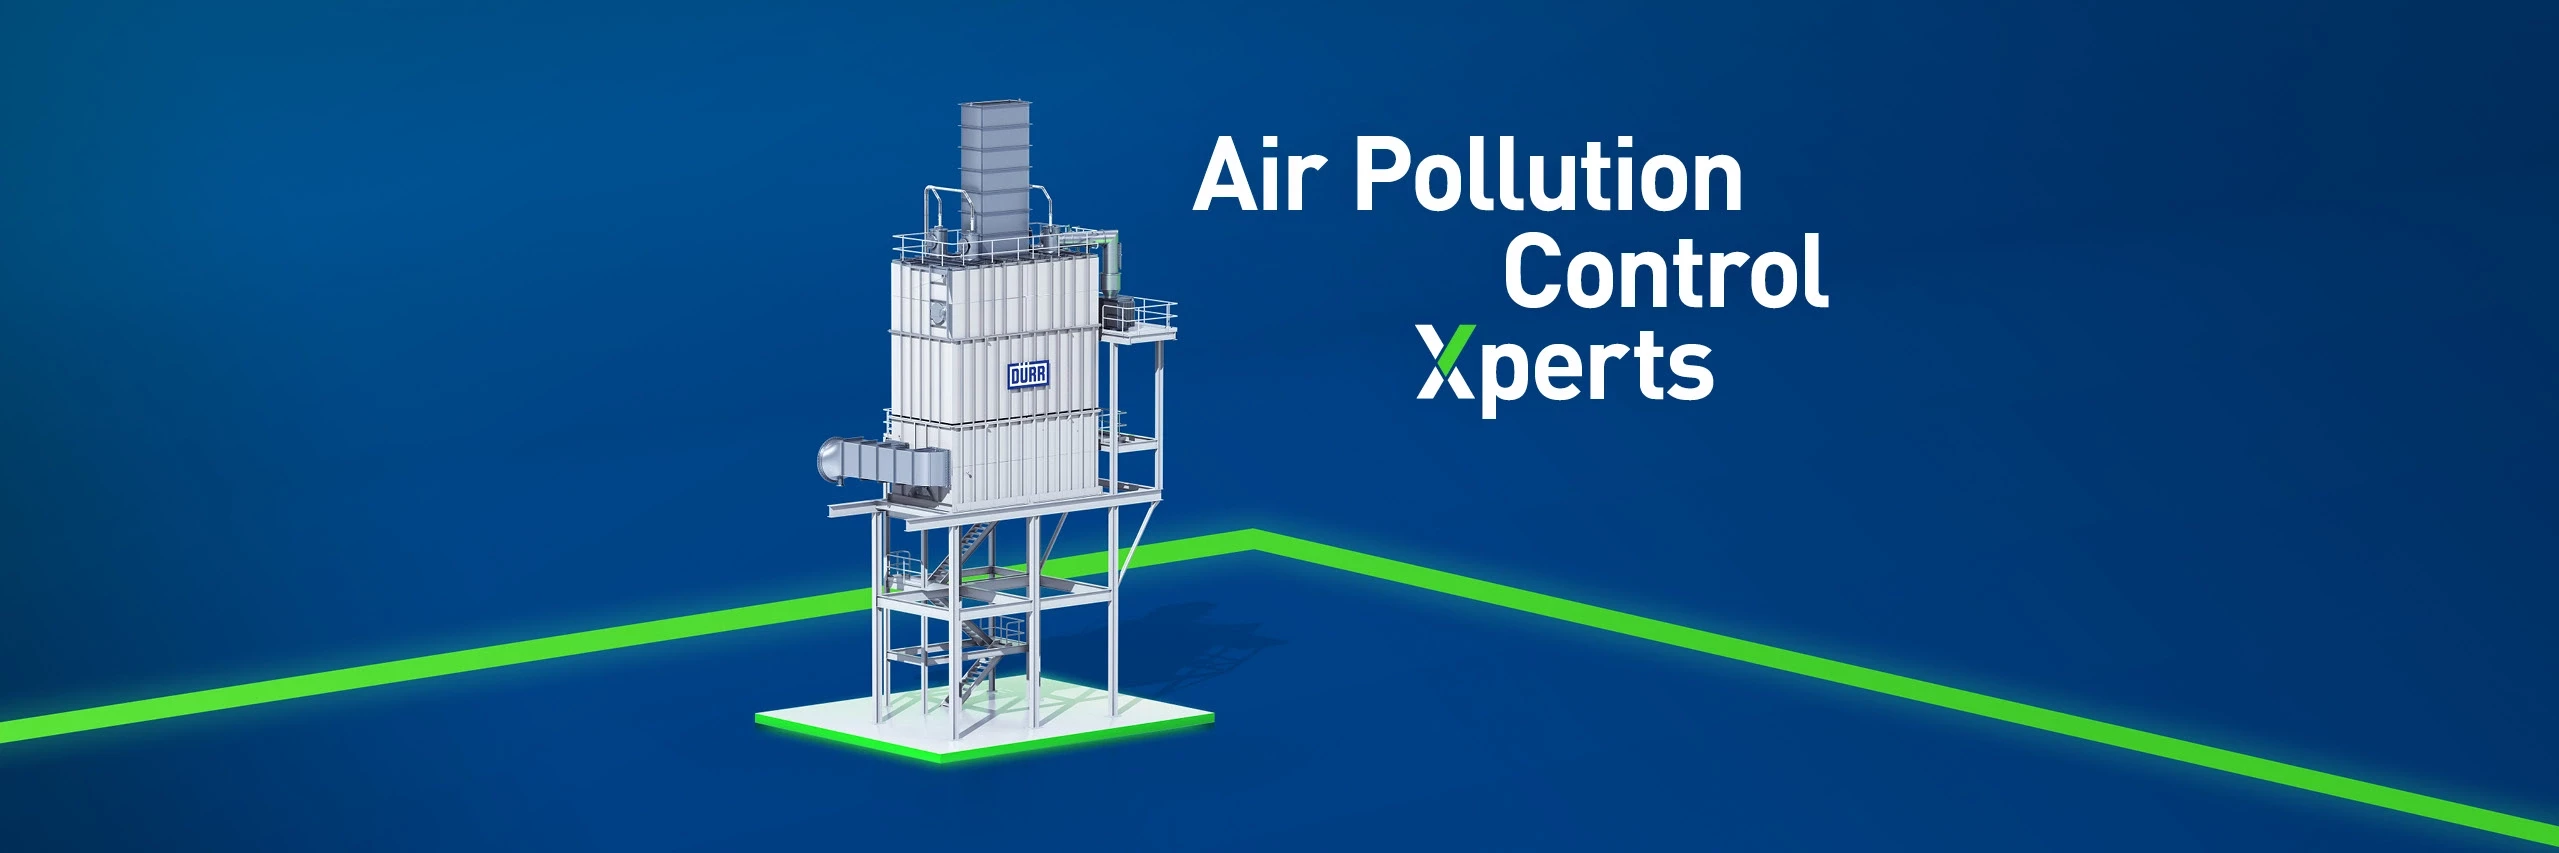 Air Pollution Control Systems and Equipment 